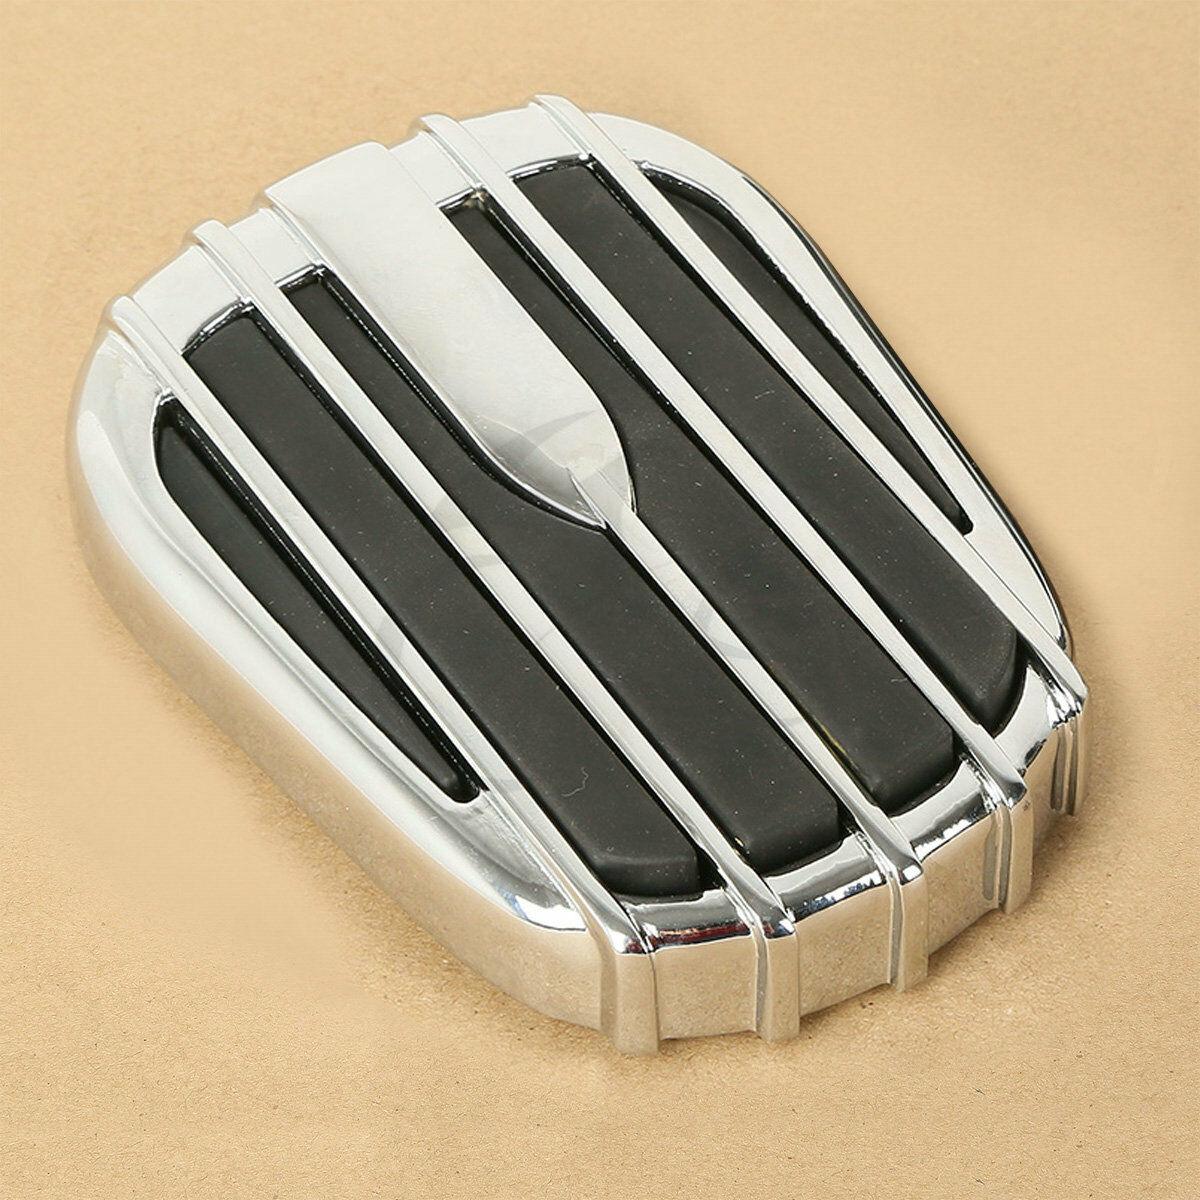 Chrome Brake Pedal Pad Cover Fit For Harley Touring 80-22 18 19 Softail FL 86-17 - Moto Life Products